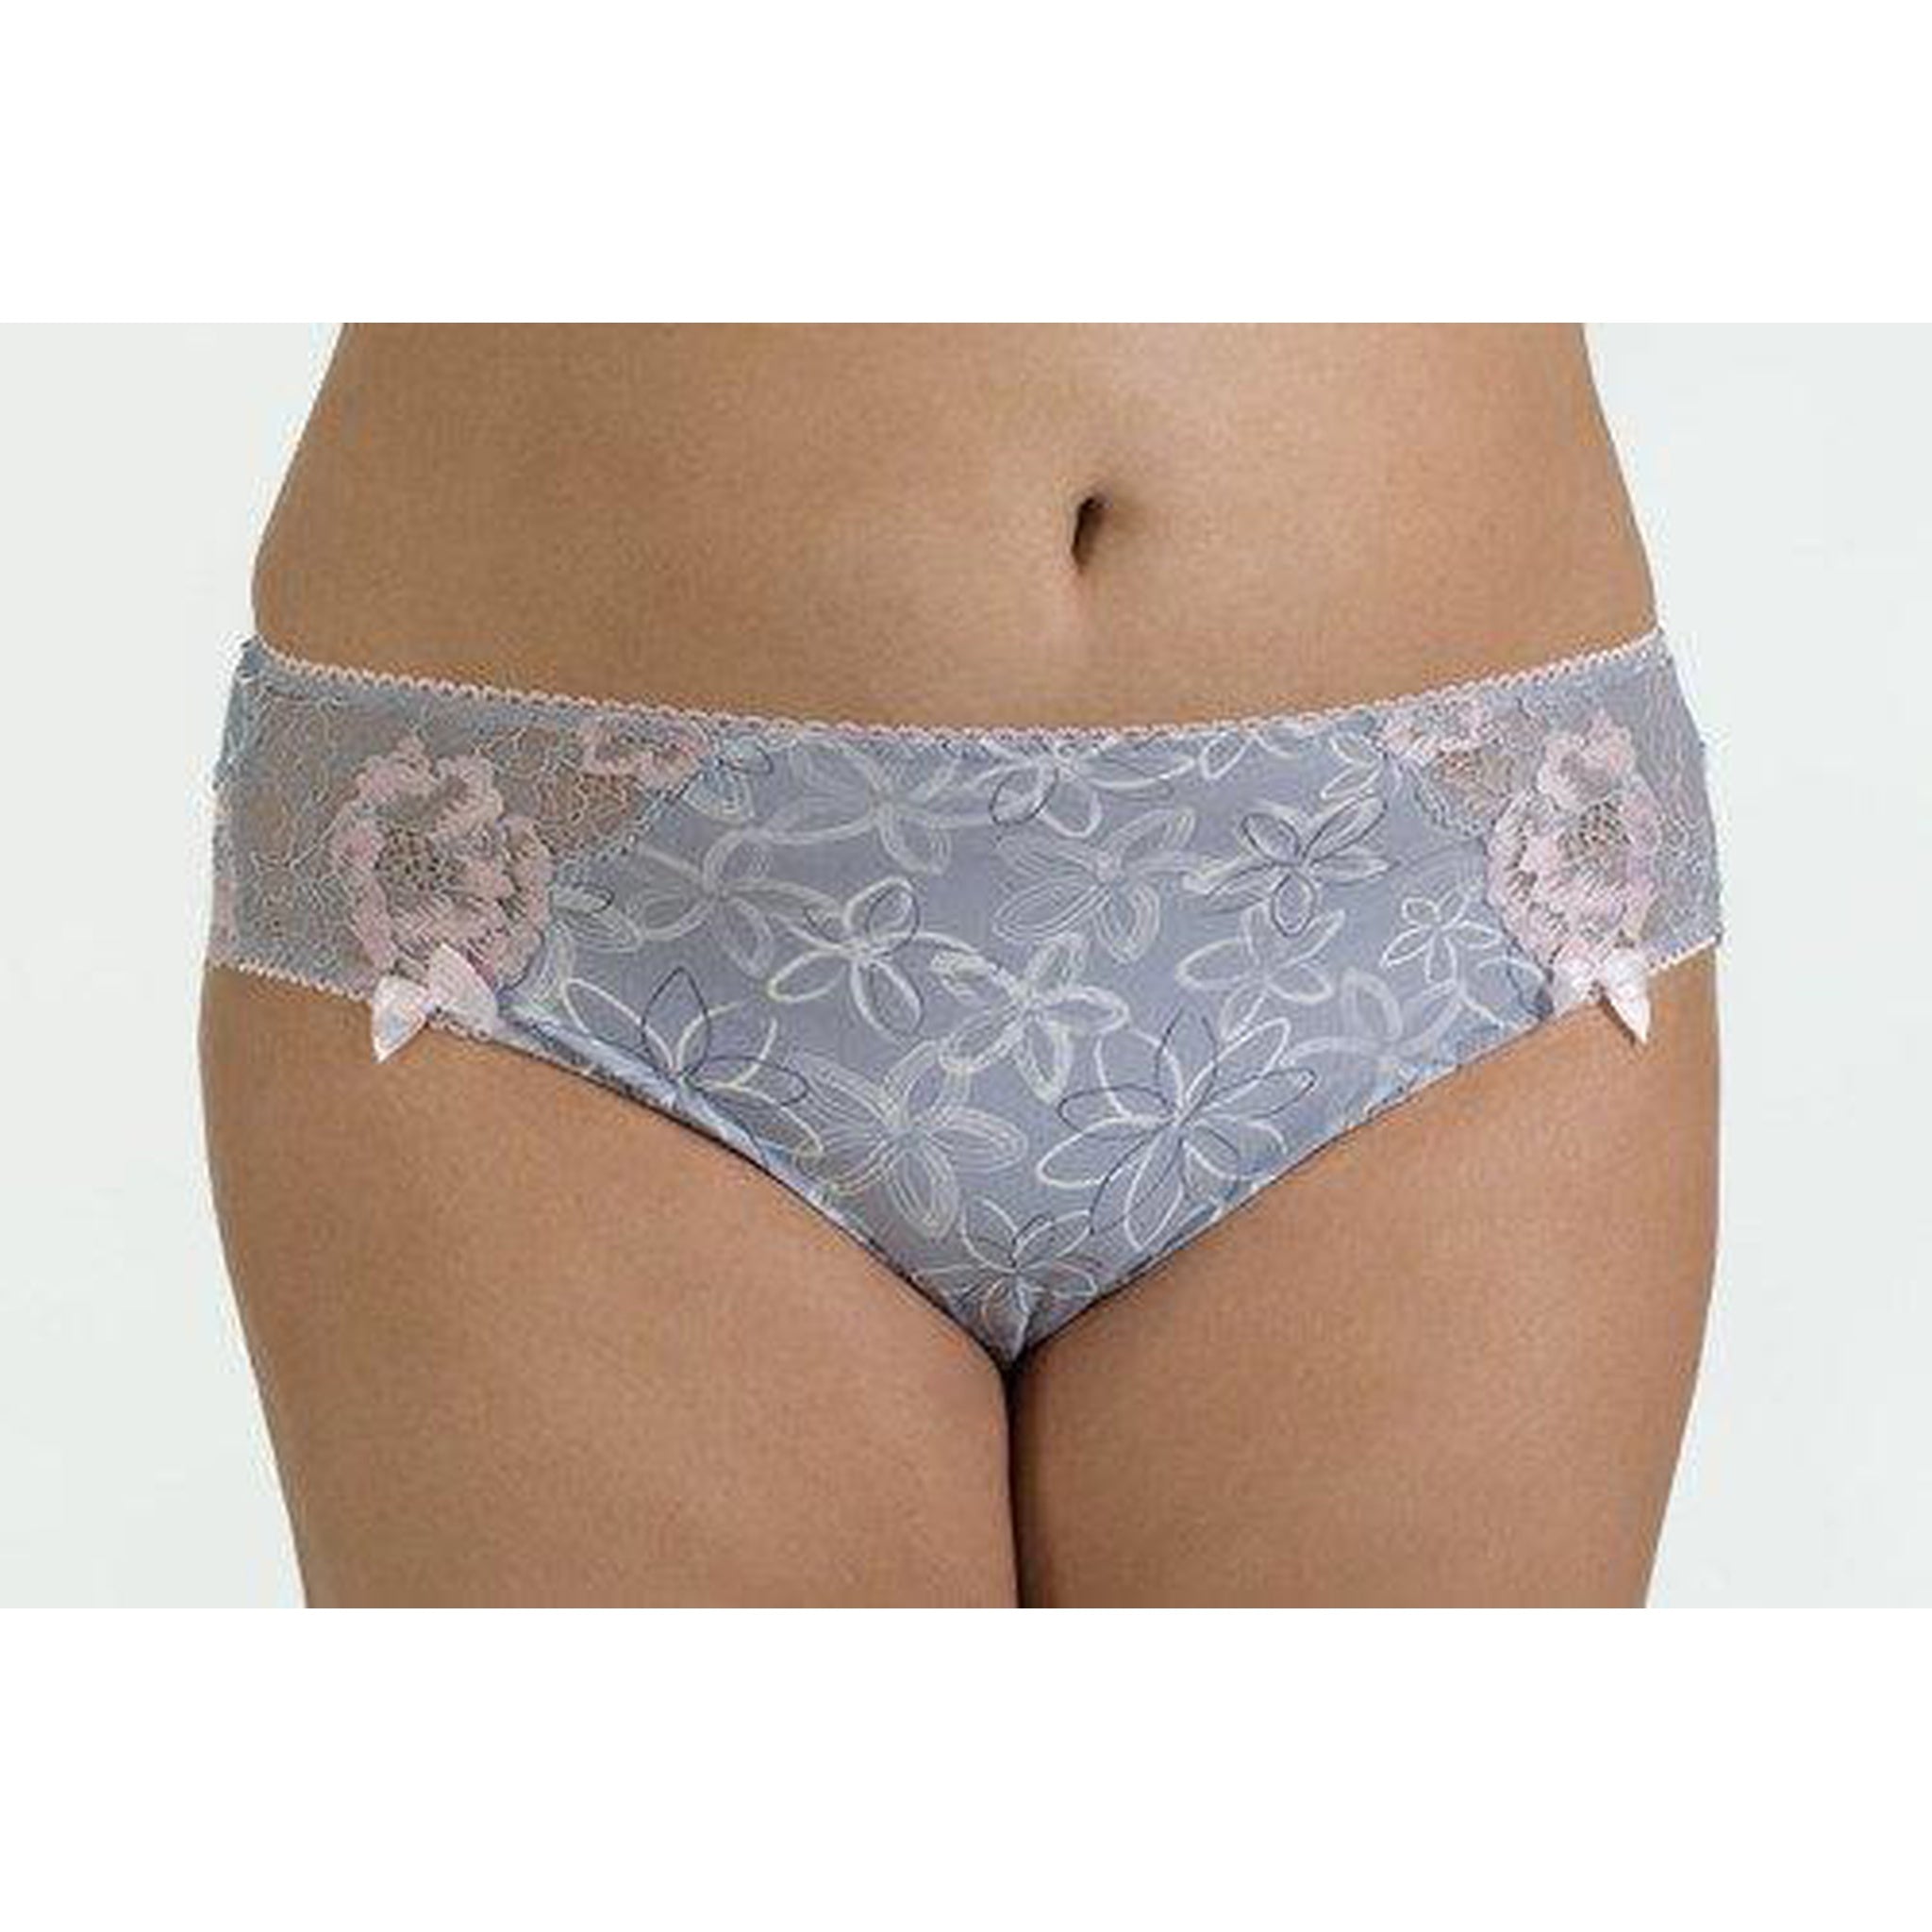 Ewa Michalak Szaron Lace Brief with Floral Embroidery